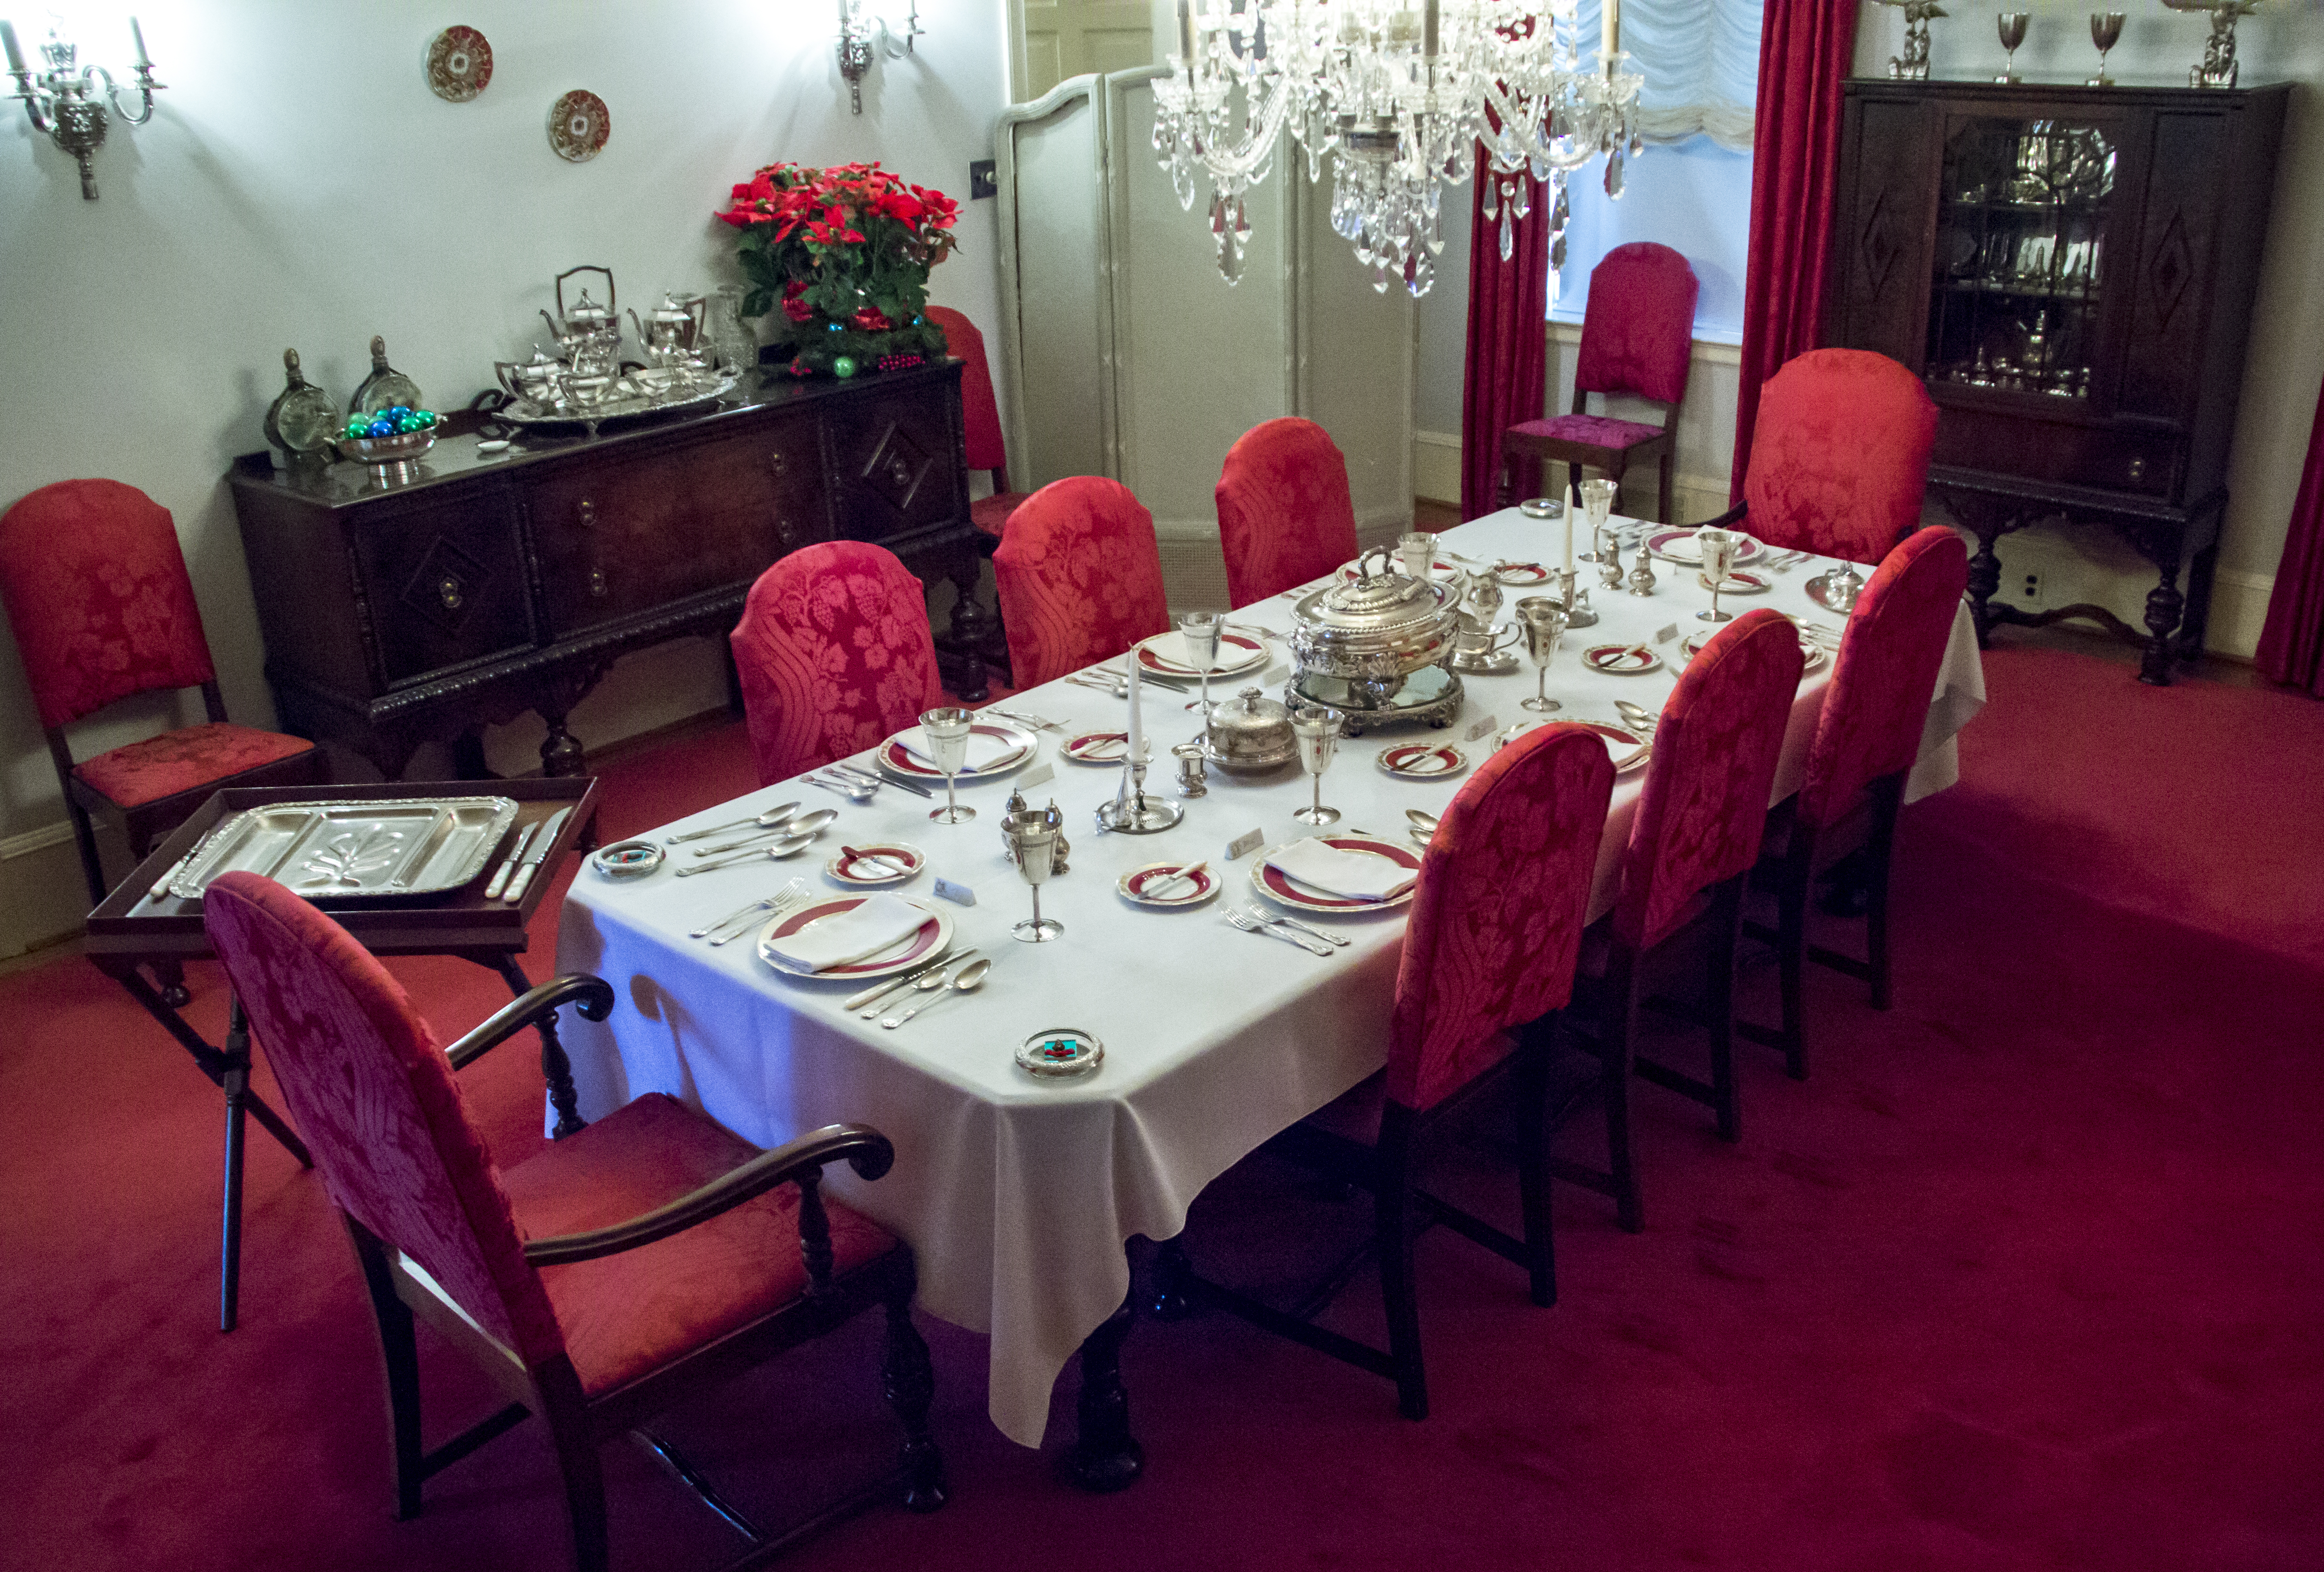 The Eisenhower dining room decorated for the holidays